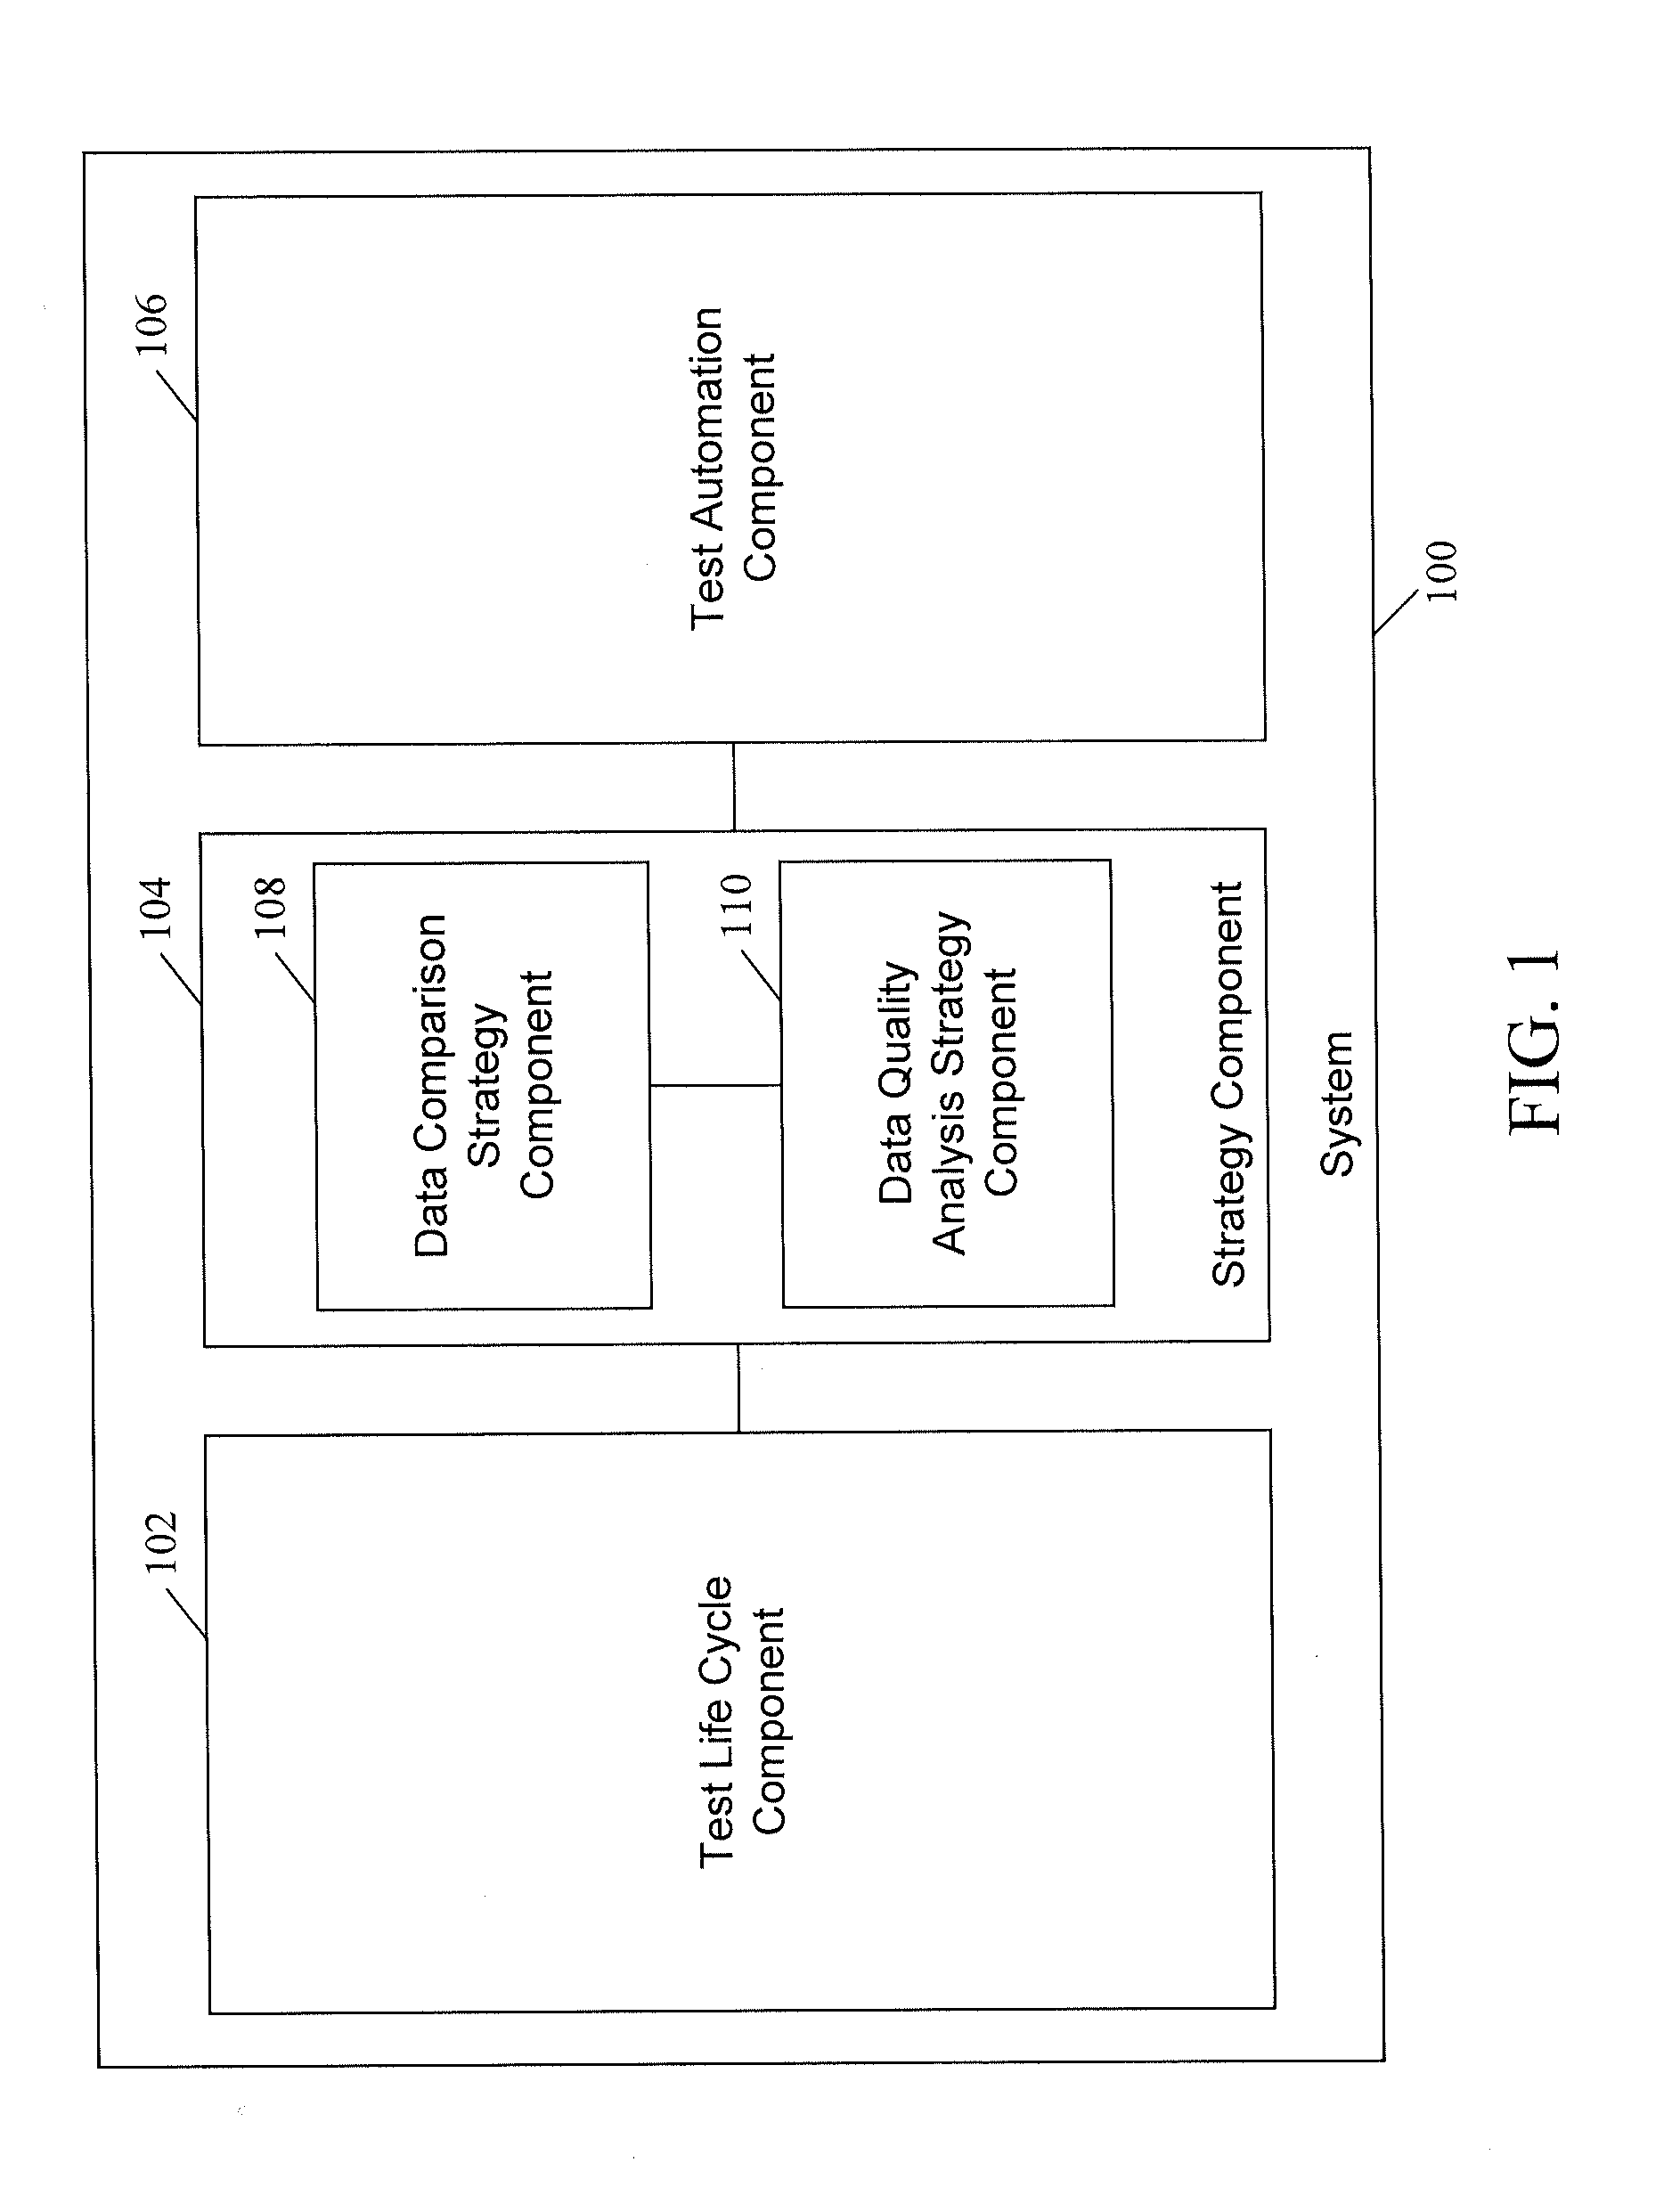 System and method for testing data at a data warehouse